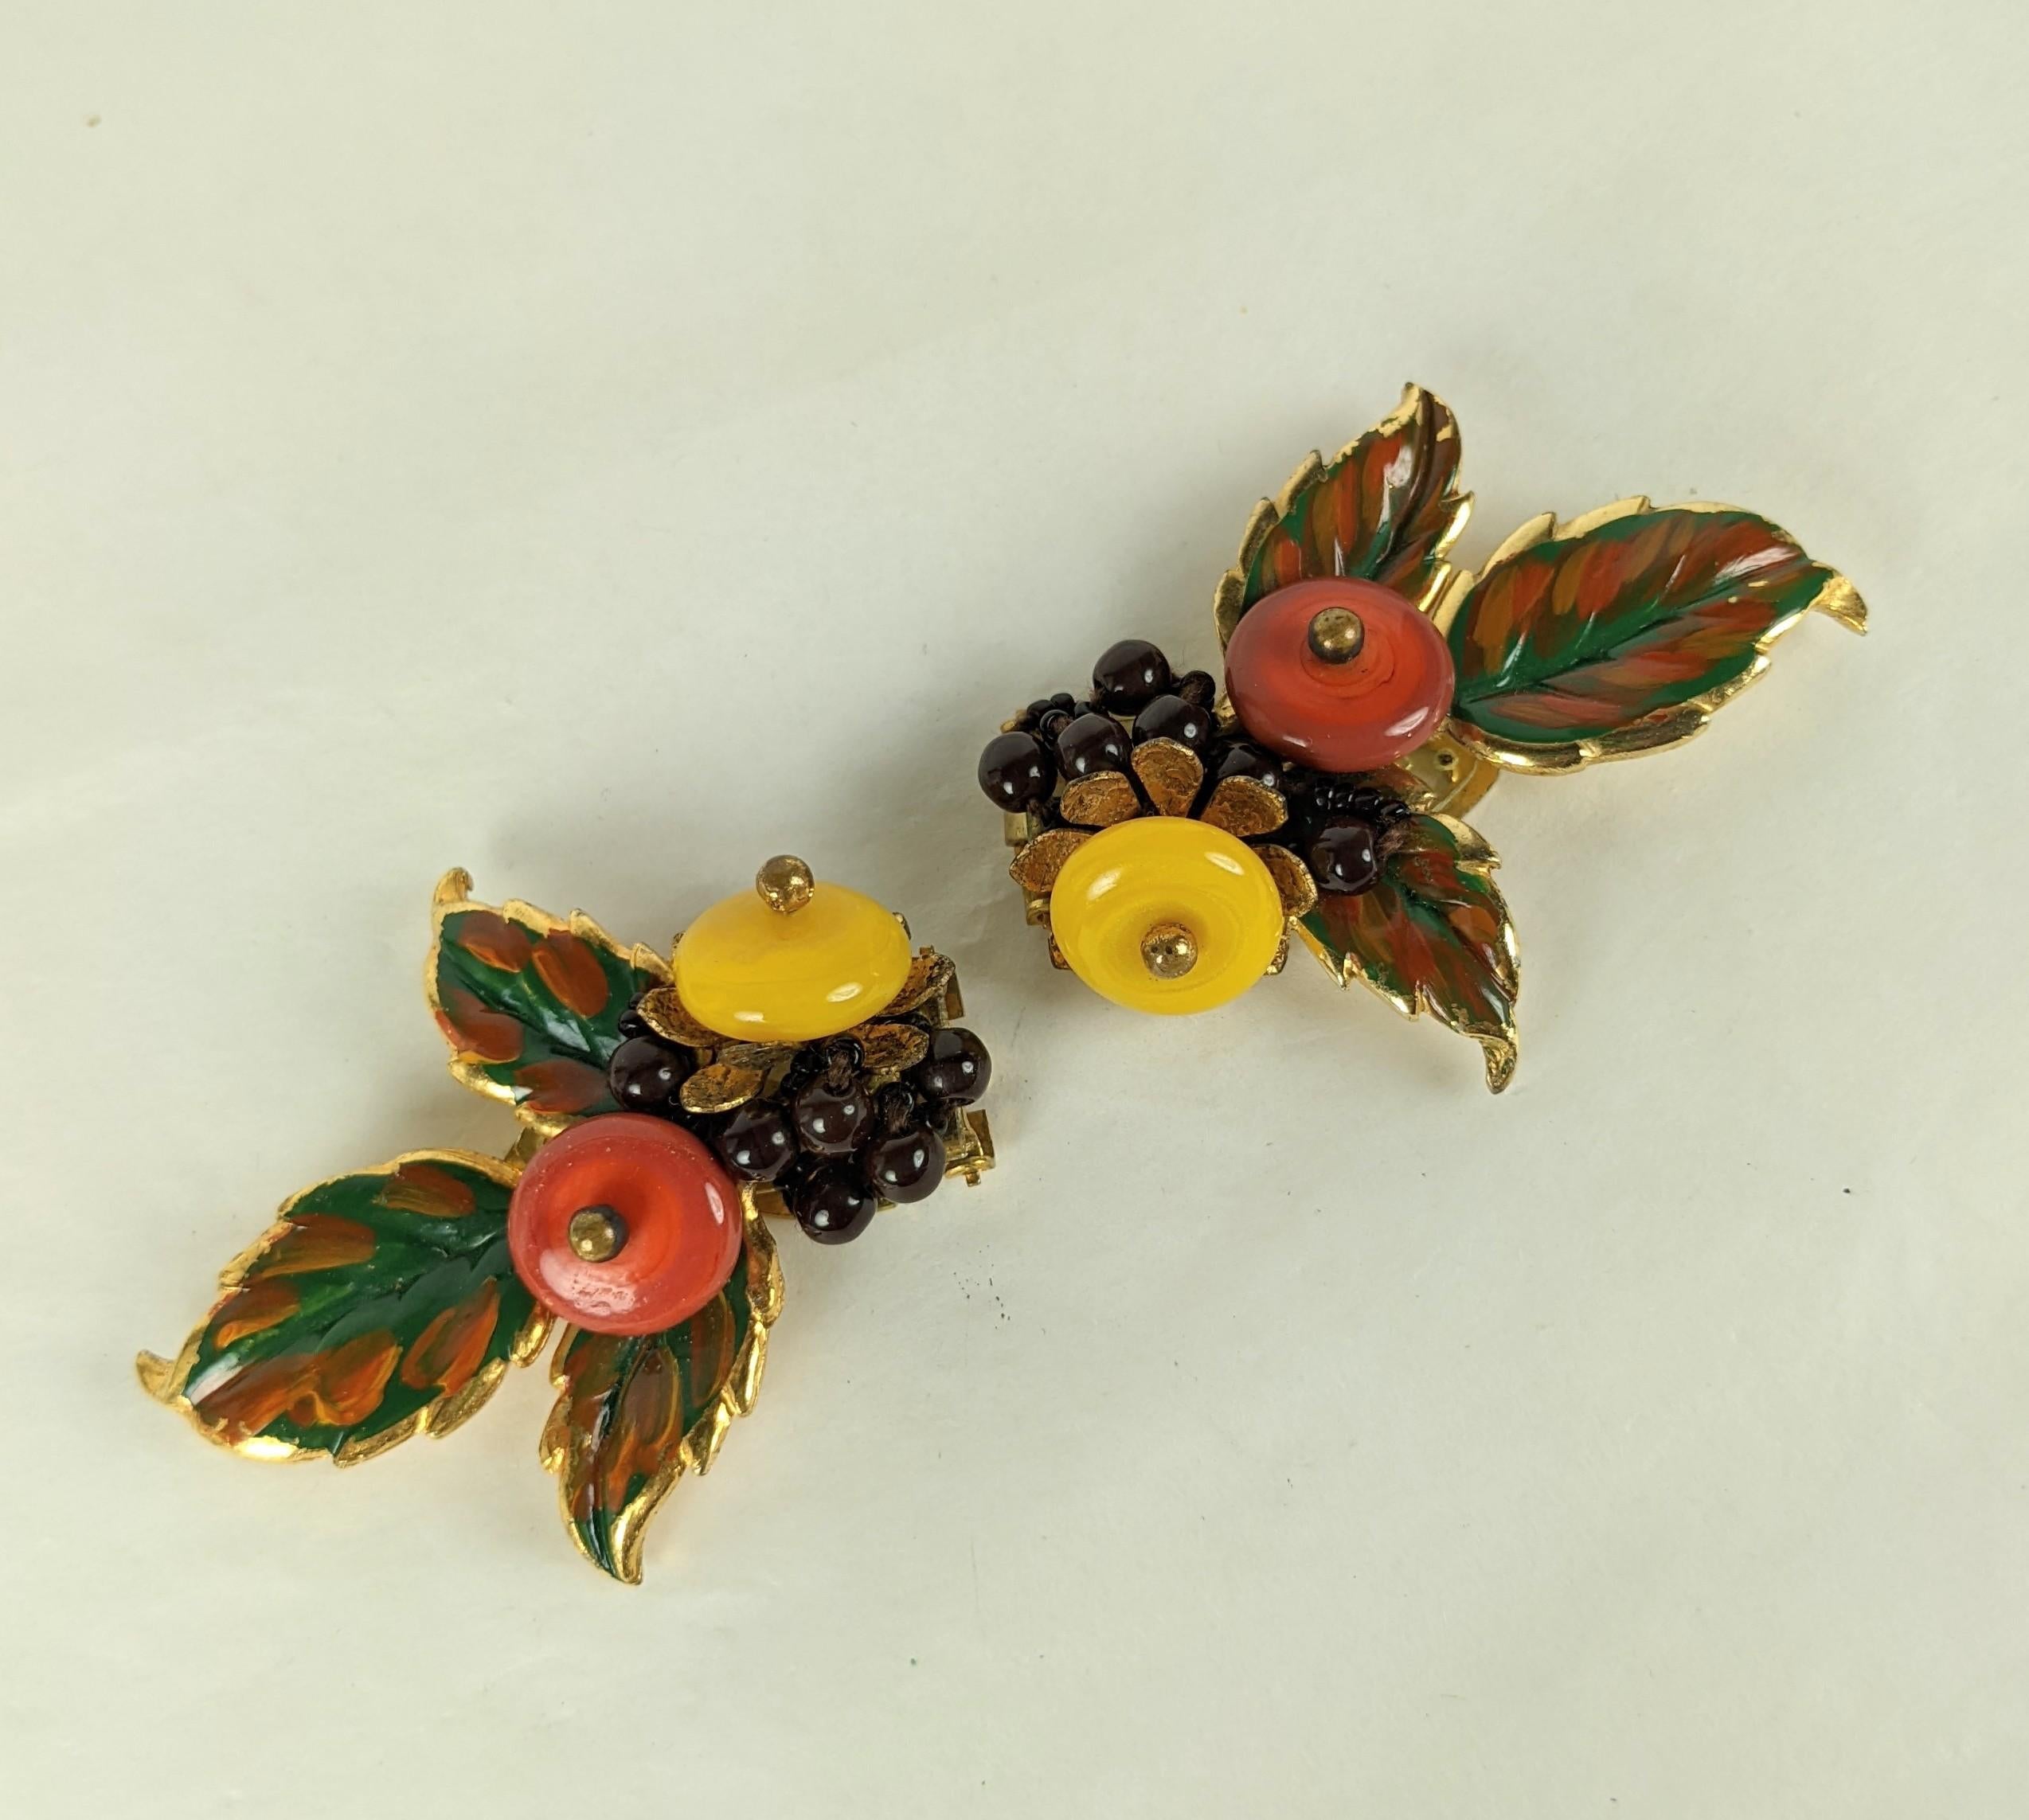 Lovely pair of Miriam Haskell Early Enamel Dress Clips from the 1930's. Gilt enamel metal with hand sewn glass pate de verre beads in mango, rust and brown. Clip back fittings designed to be worn along neckline or lapel, Unsigned early clips. 1930's